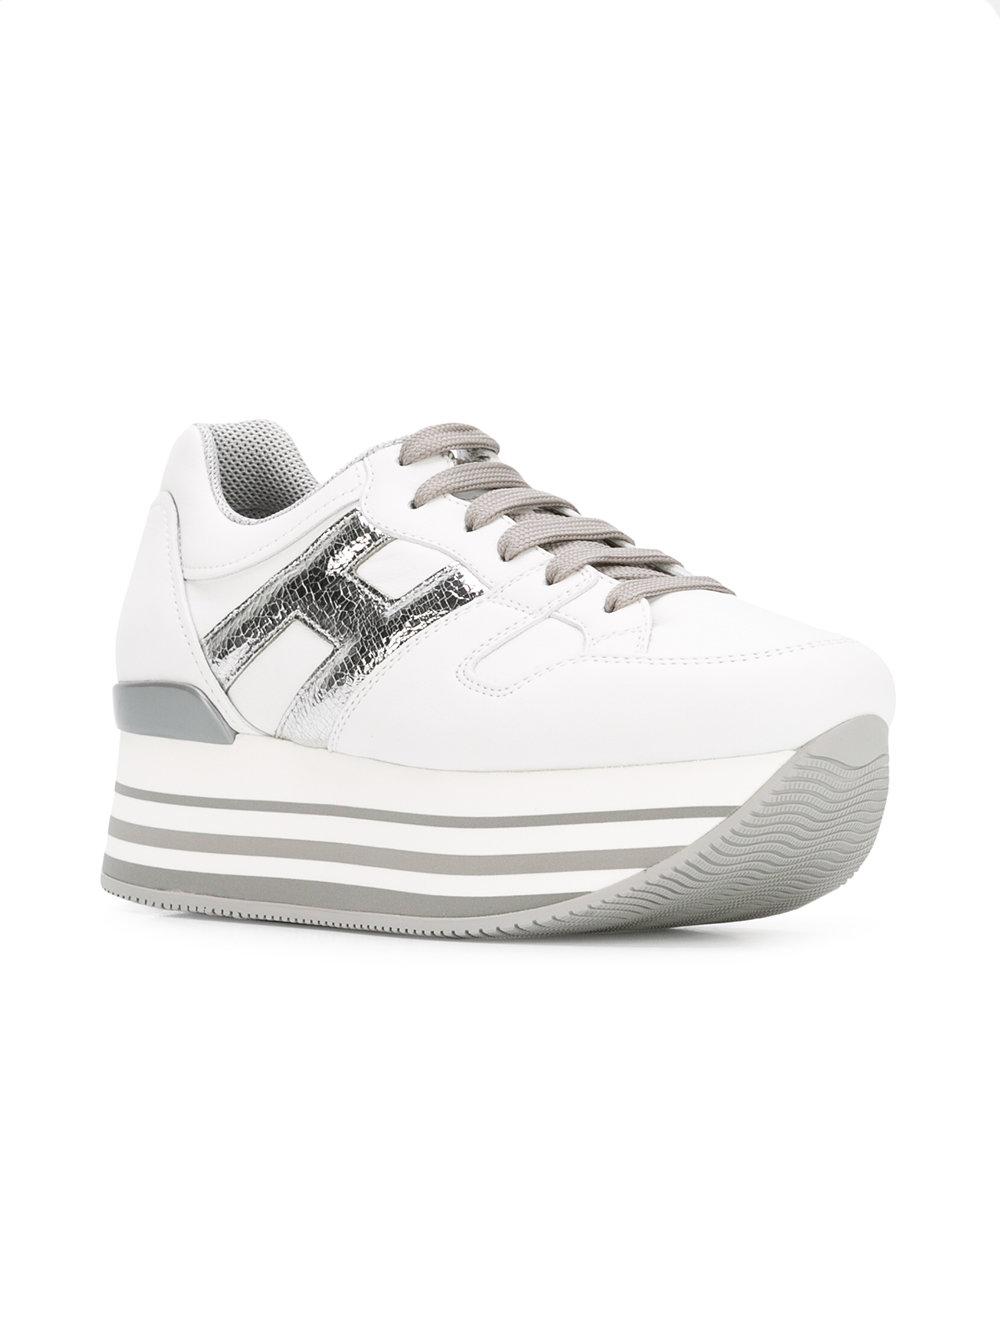 Hogan Leather Platform Sneakers in White - Lyst